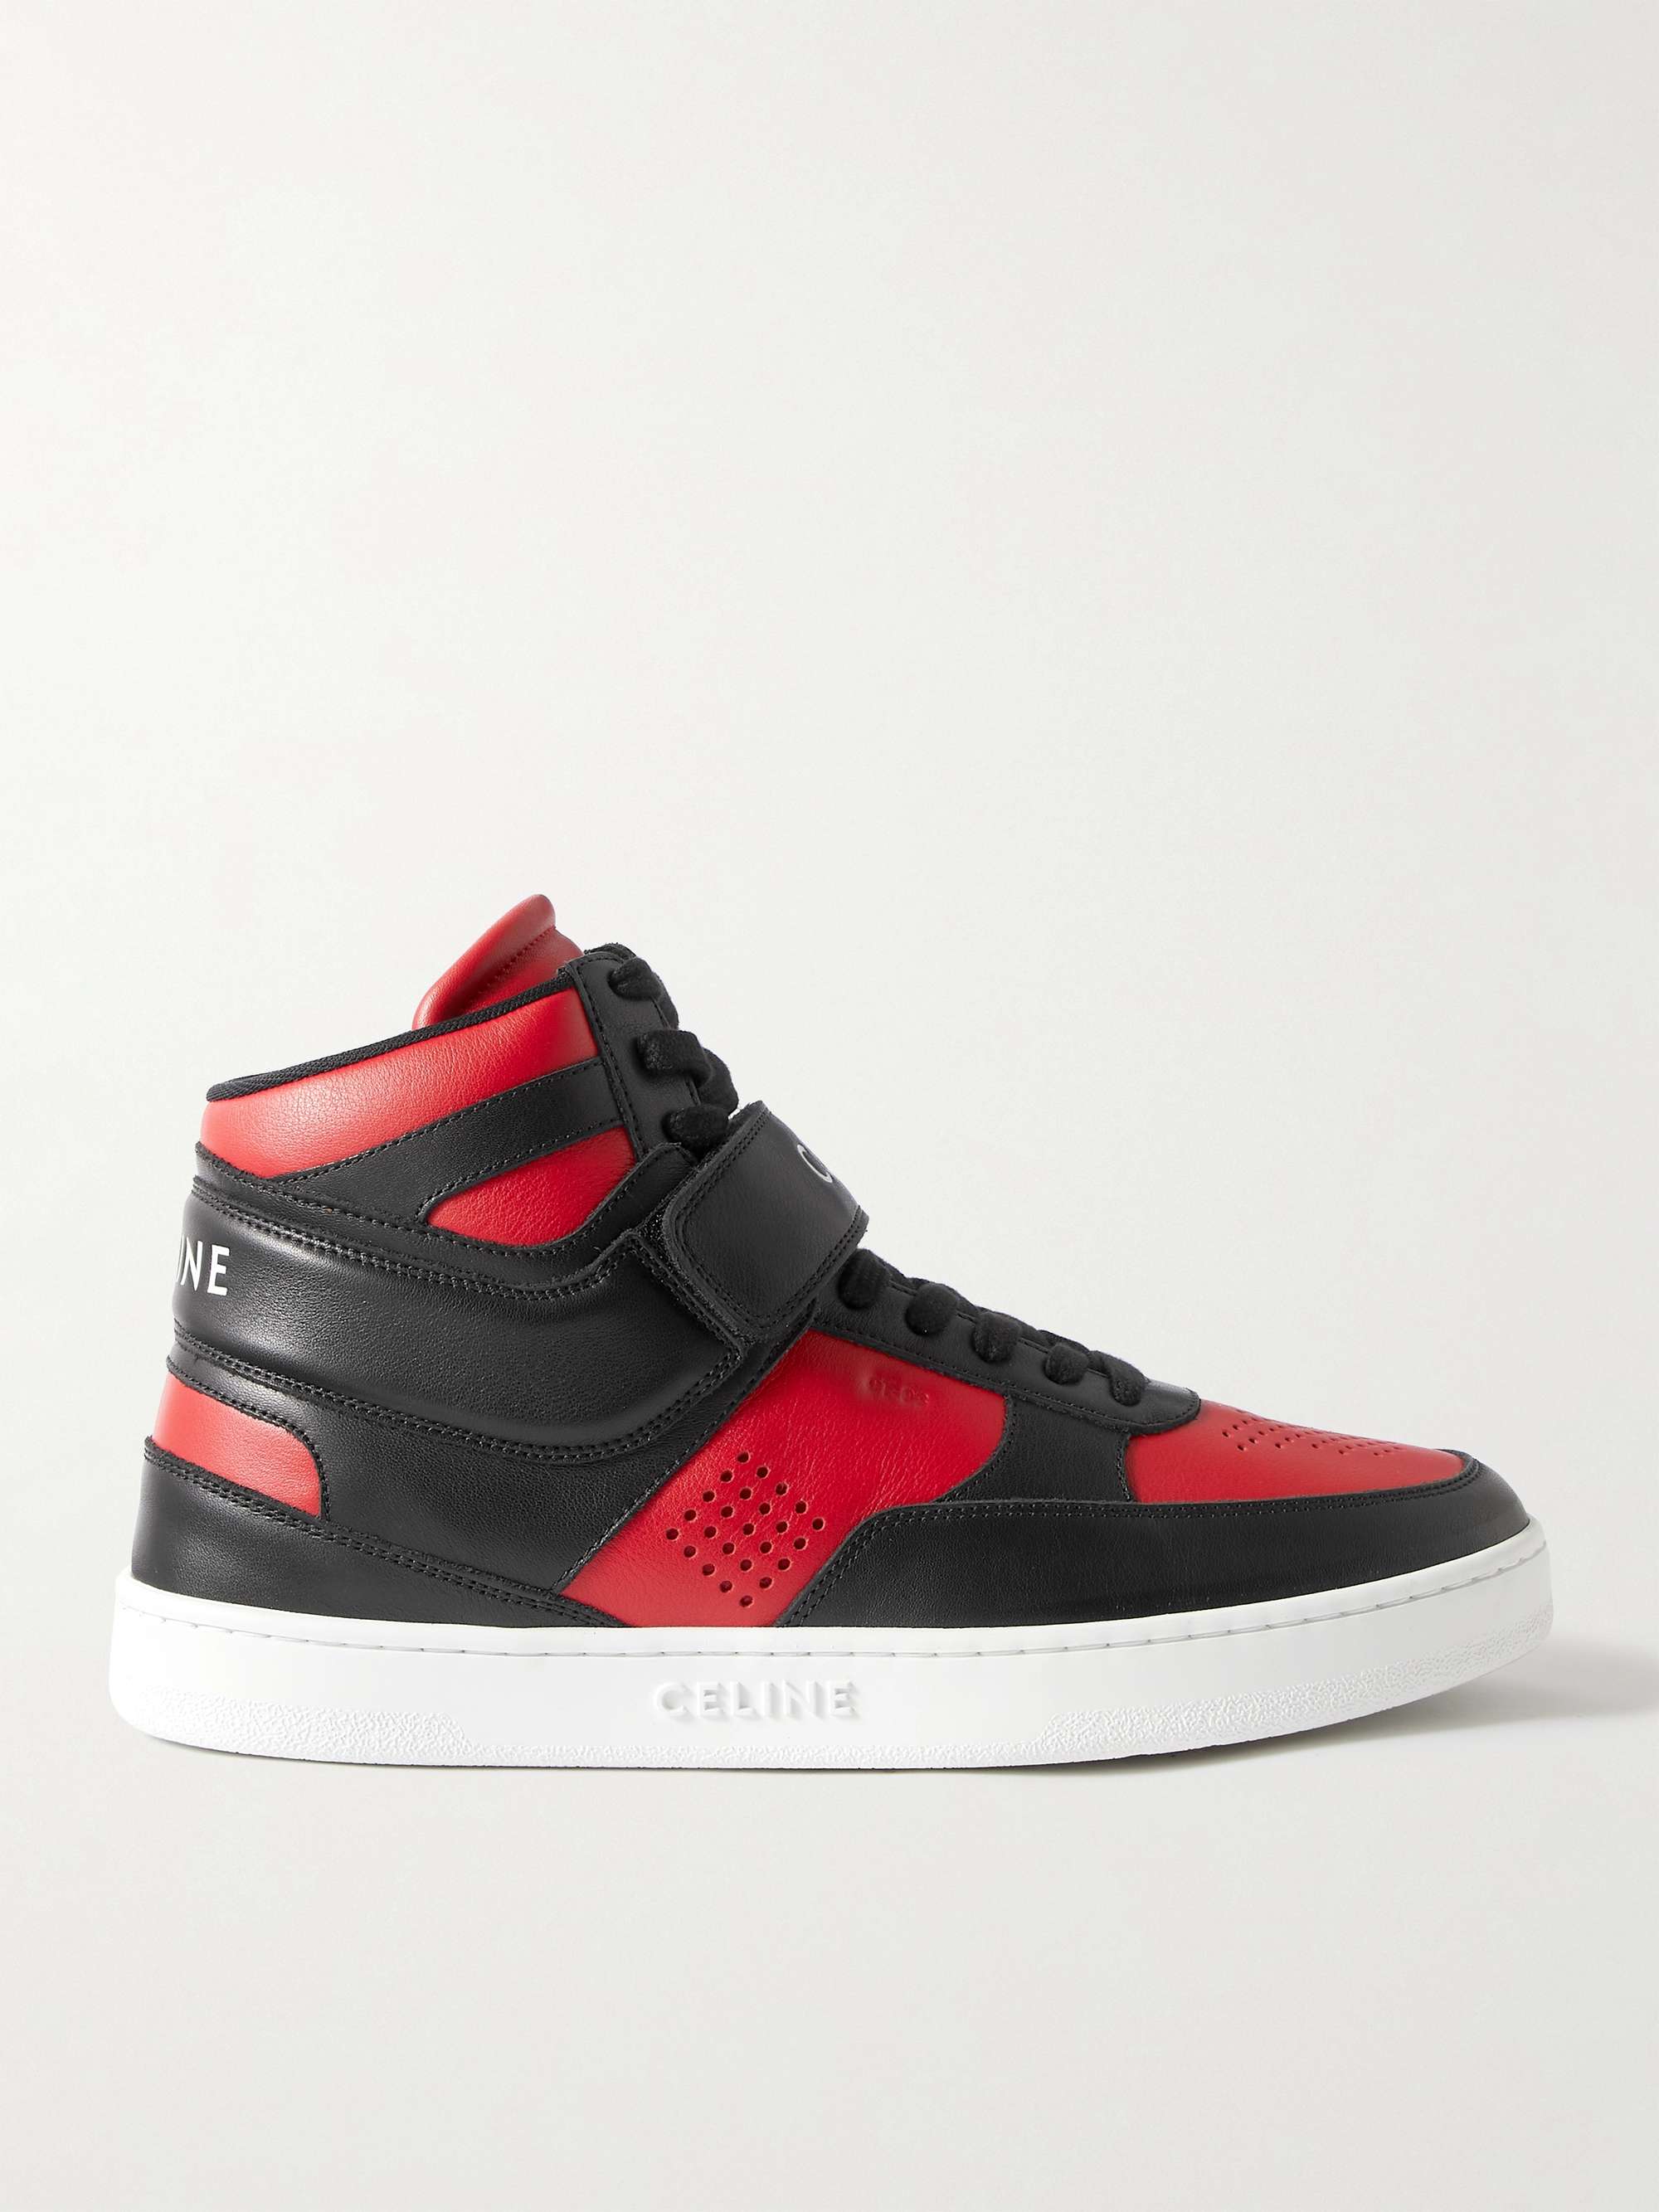 CELINE HOMME CT-03 Leather High-Top Sneakers for Men | MR PORTER